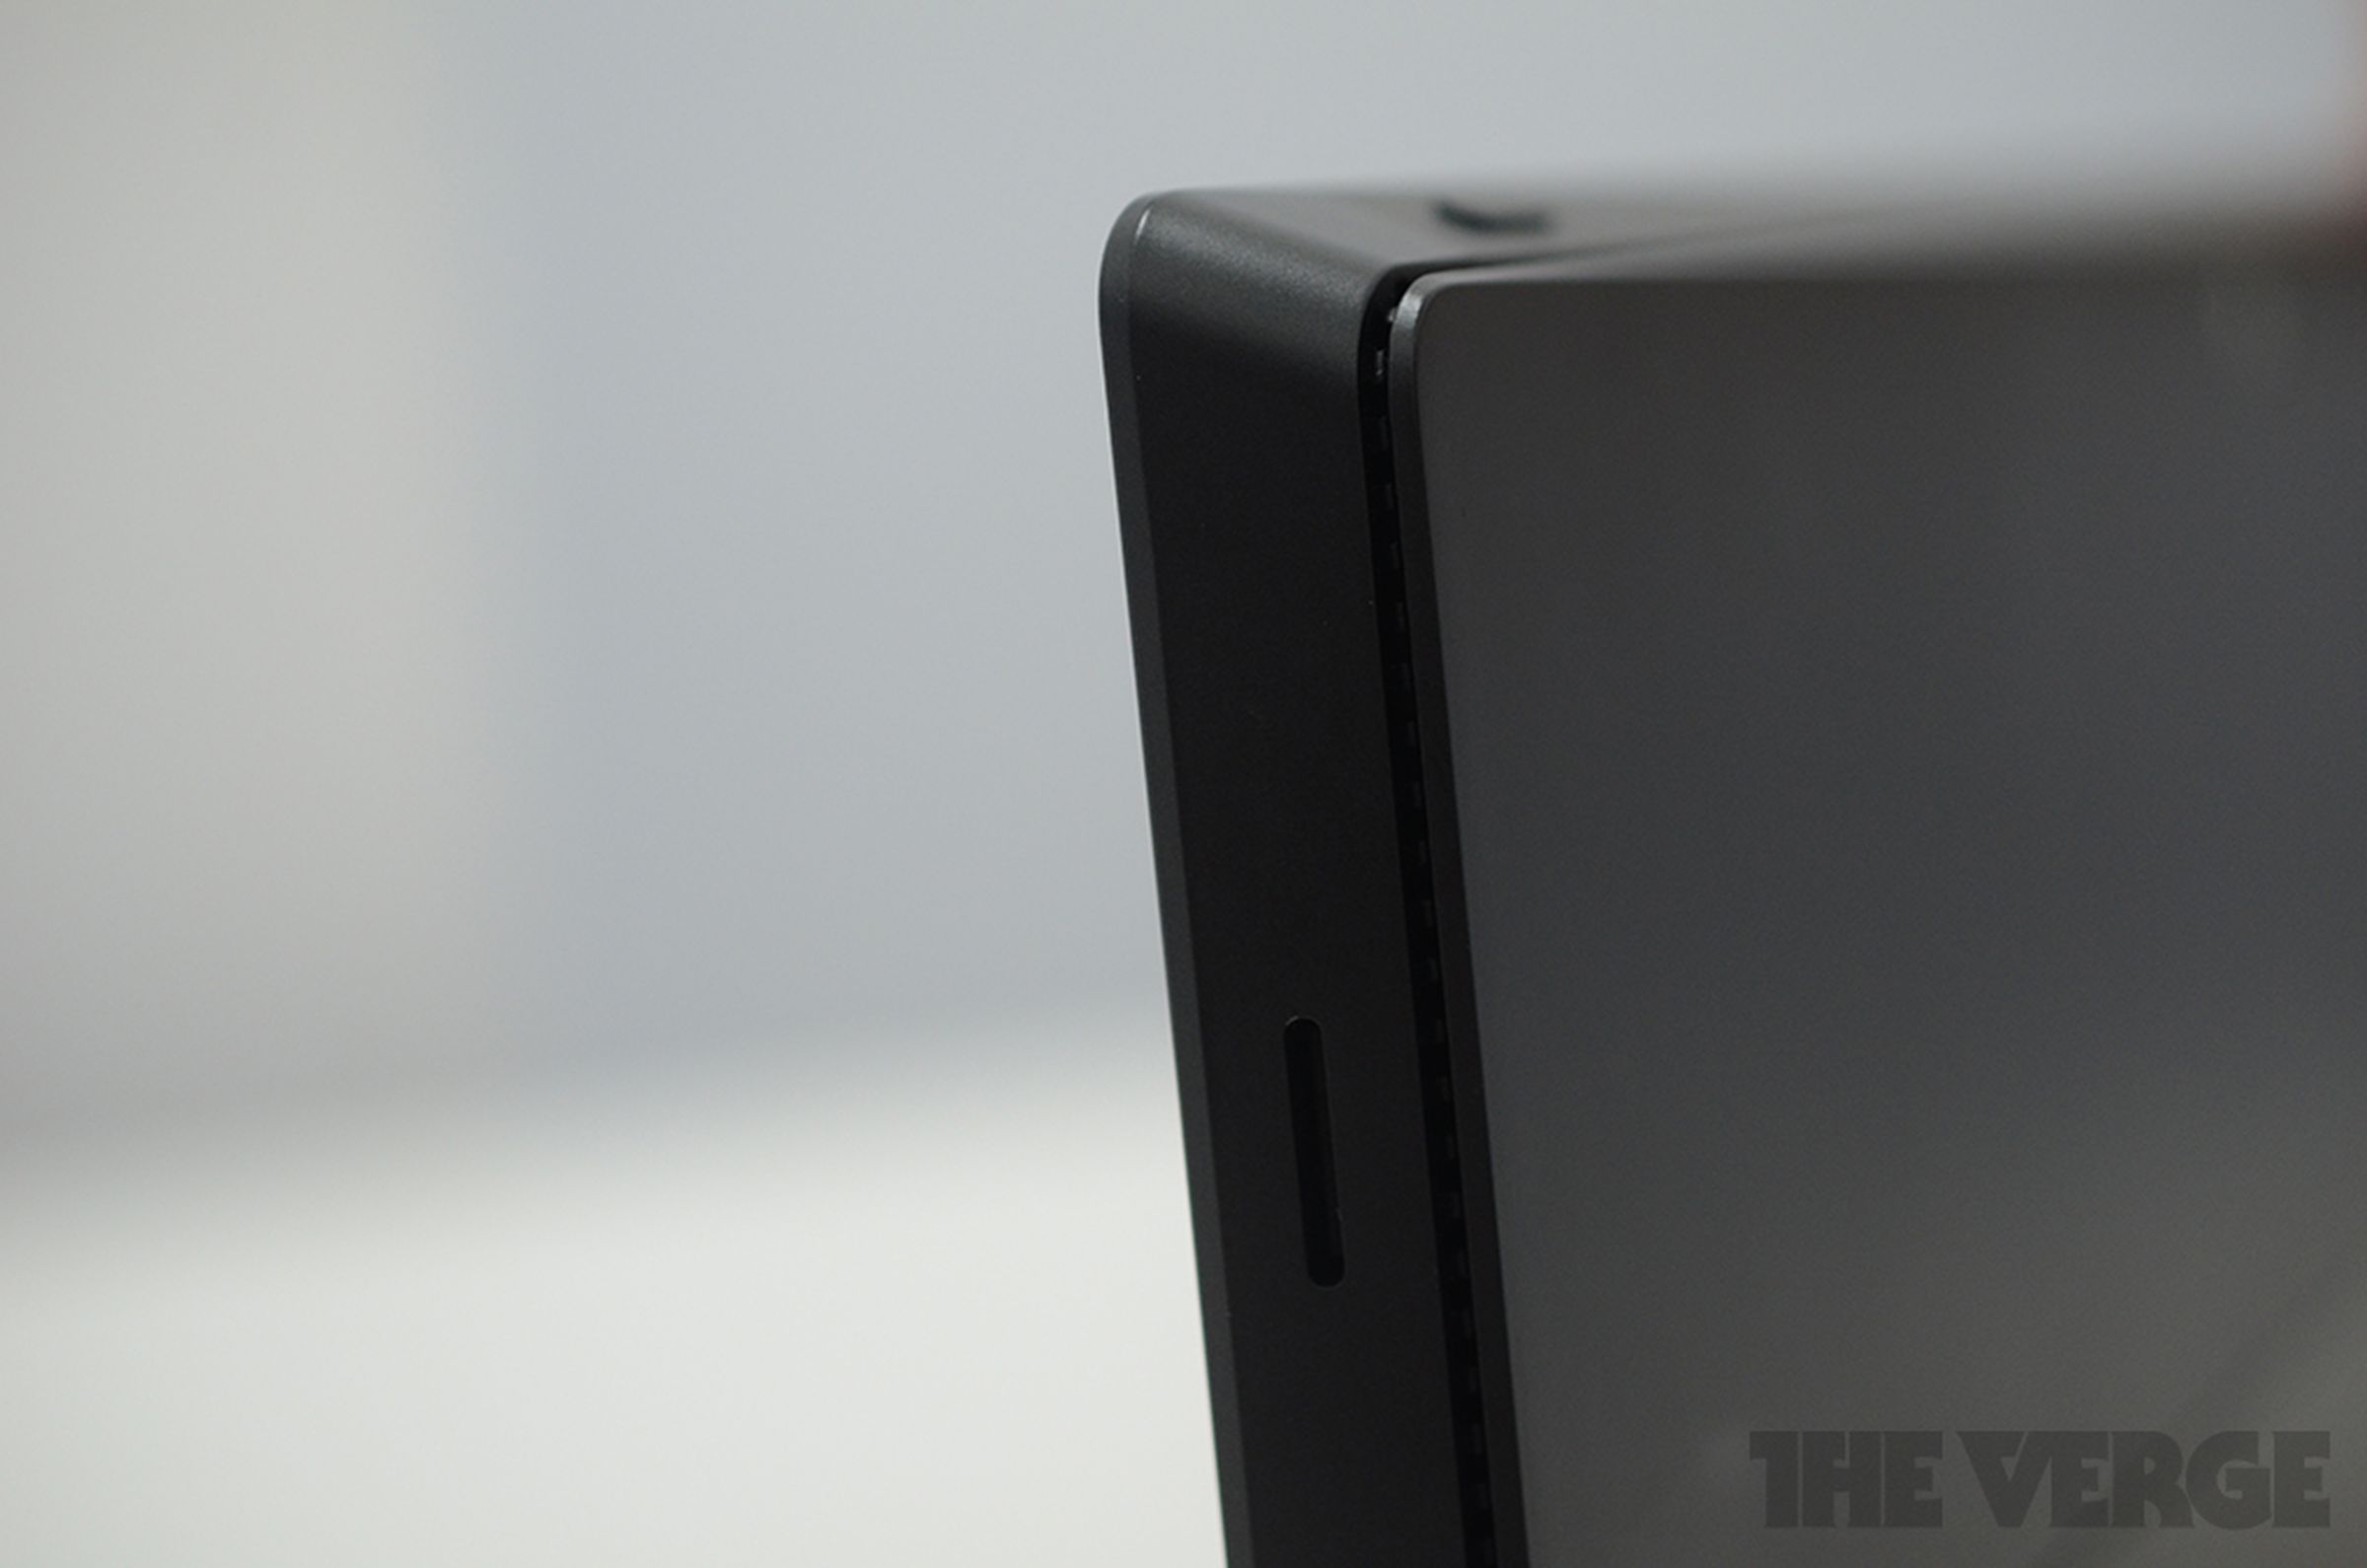 Surface Pro 2 hands-on photos